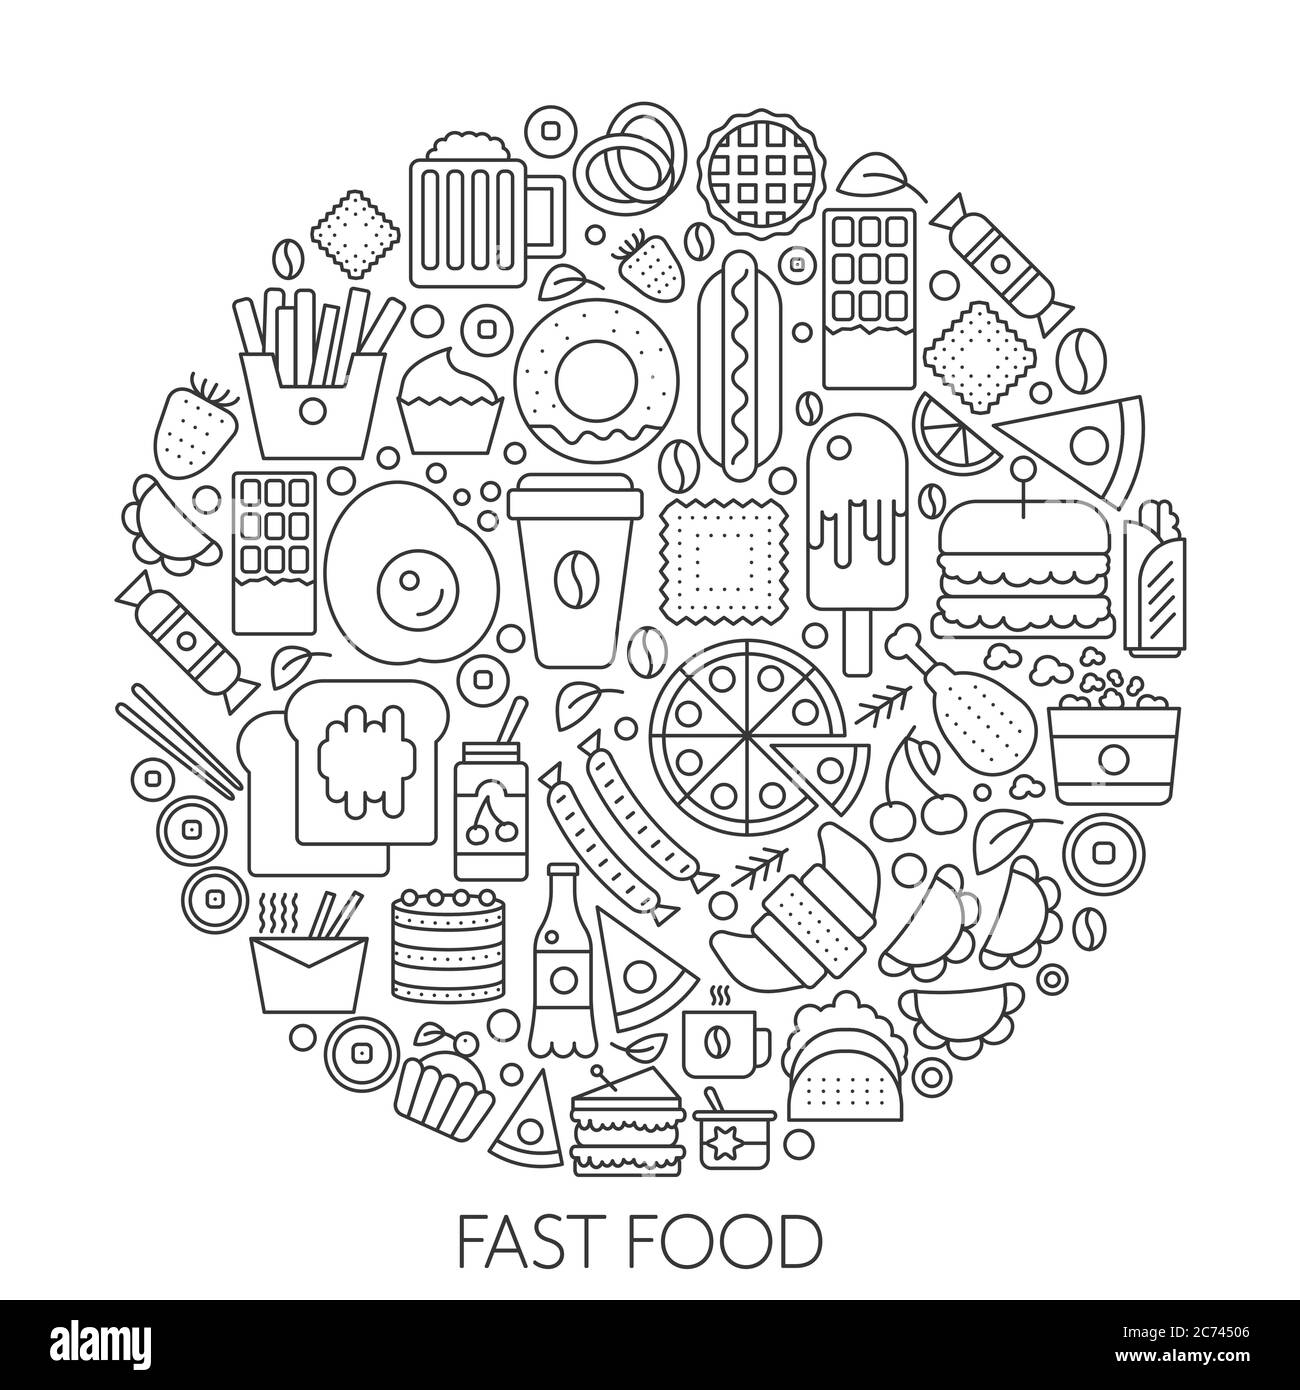 Fast food icons in circle - concept line vector illustration infographic for cover, emblem, badge. Outline icon set Stock Vector